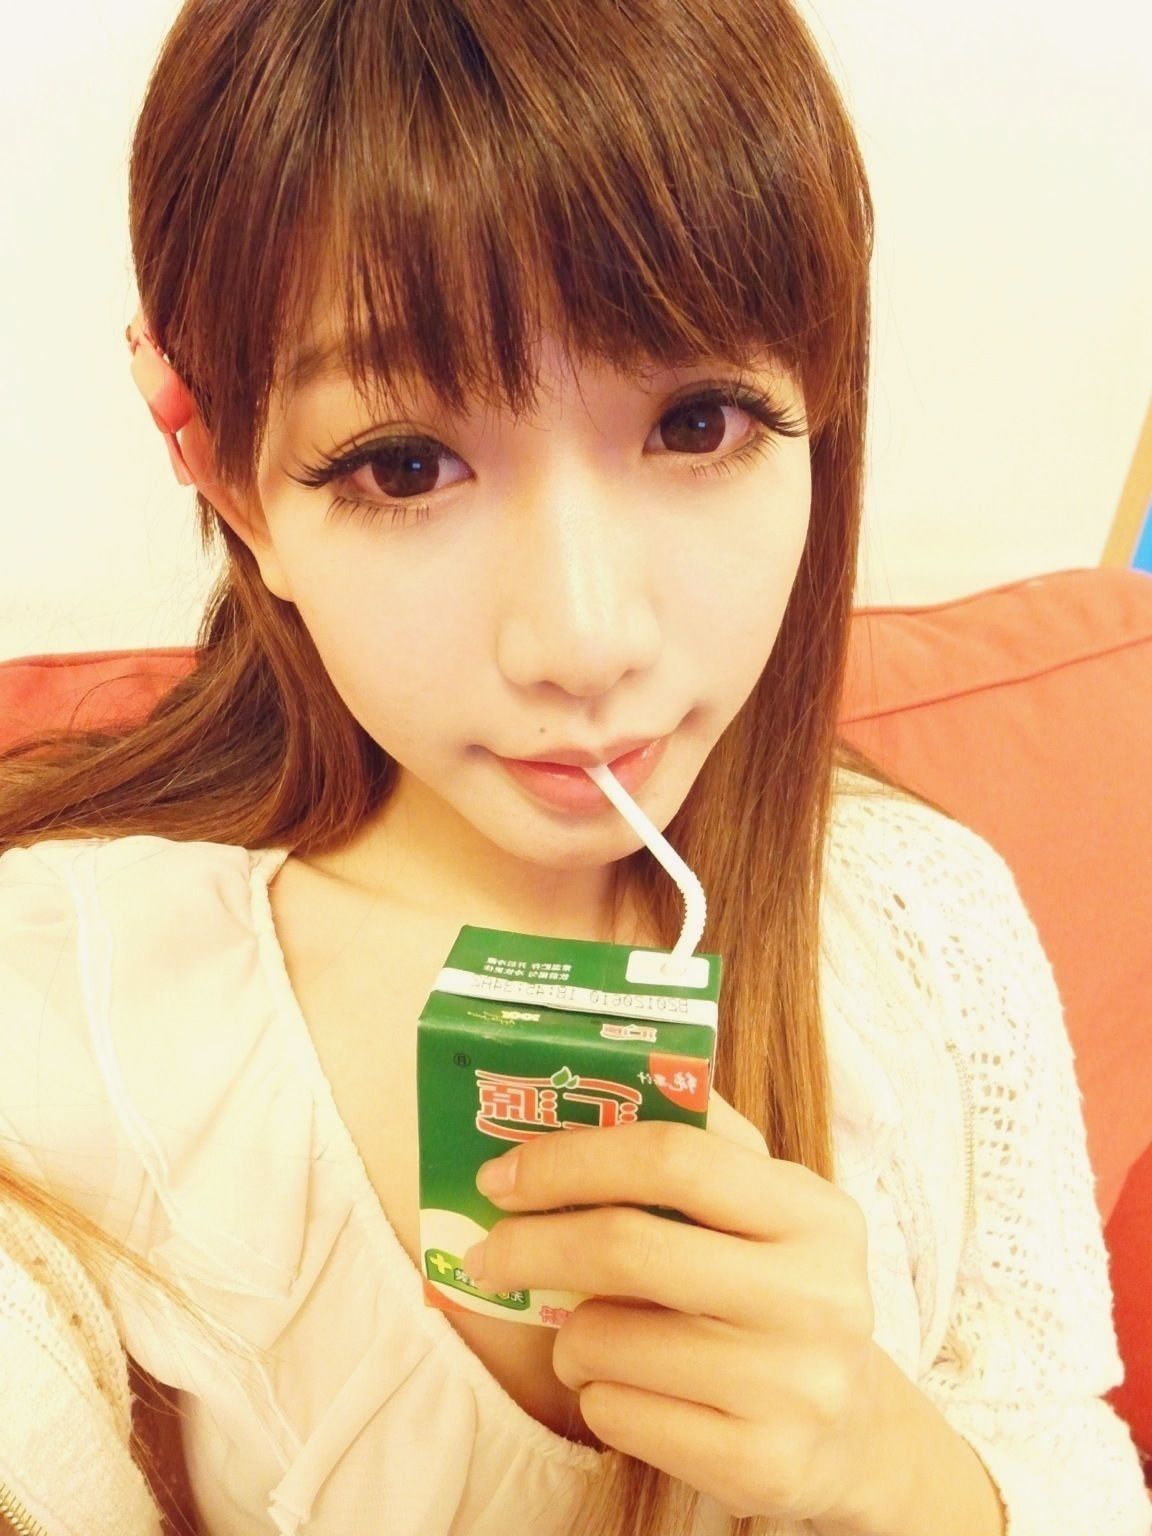 Chen Wei “personal life photo, microblogging picture” 2nd photo collection